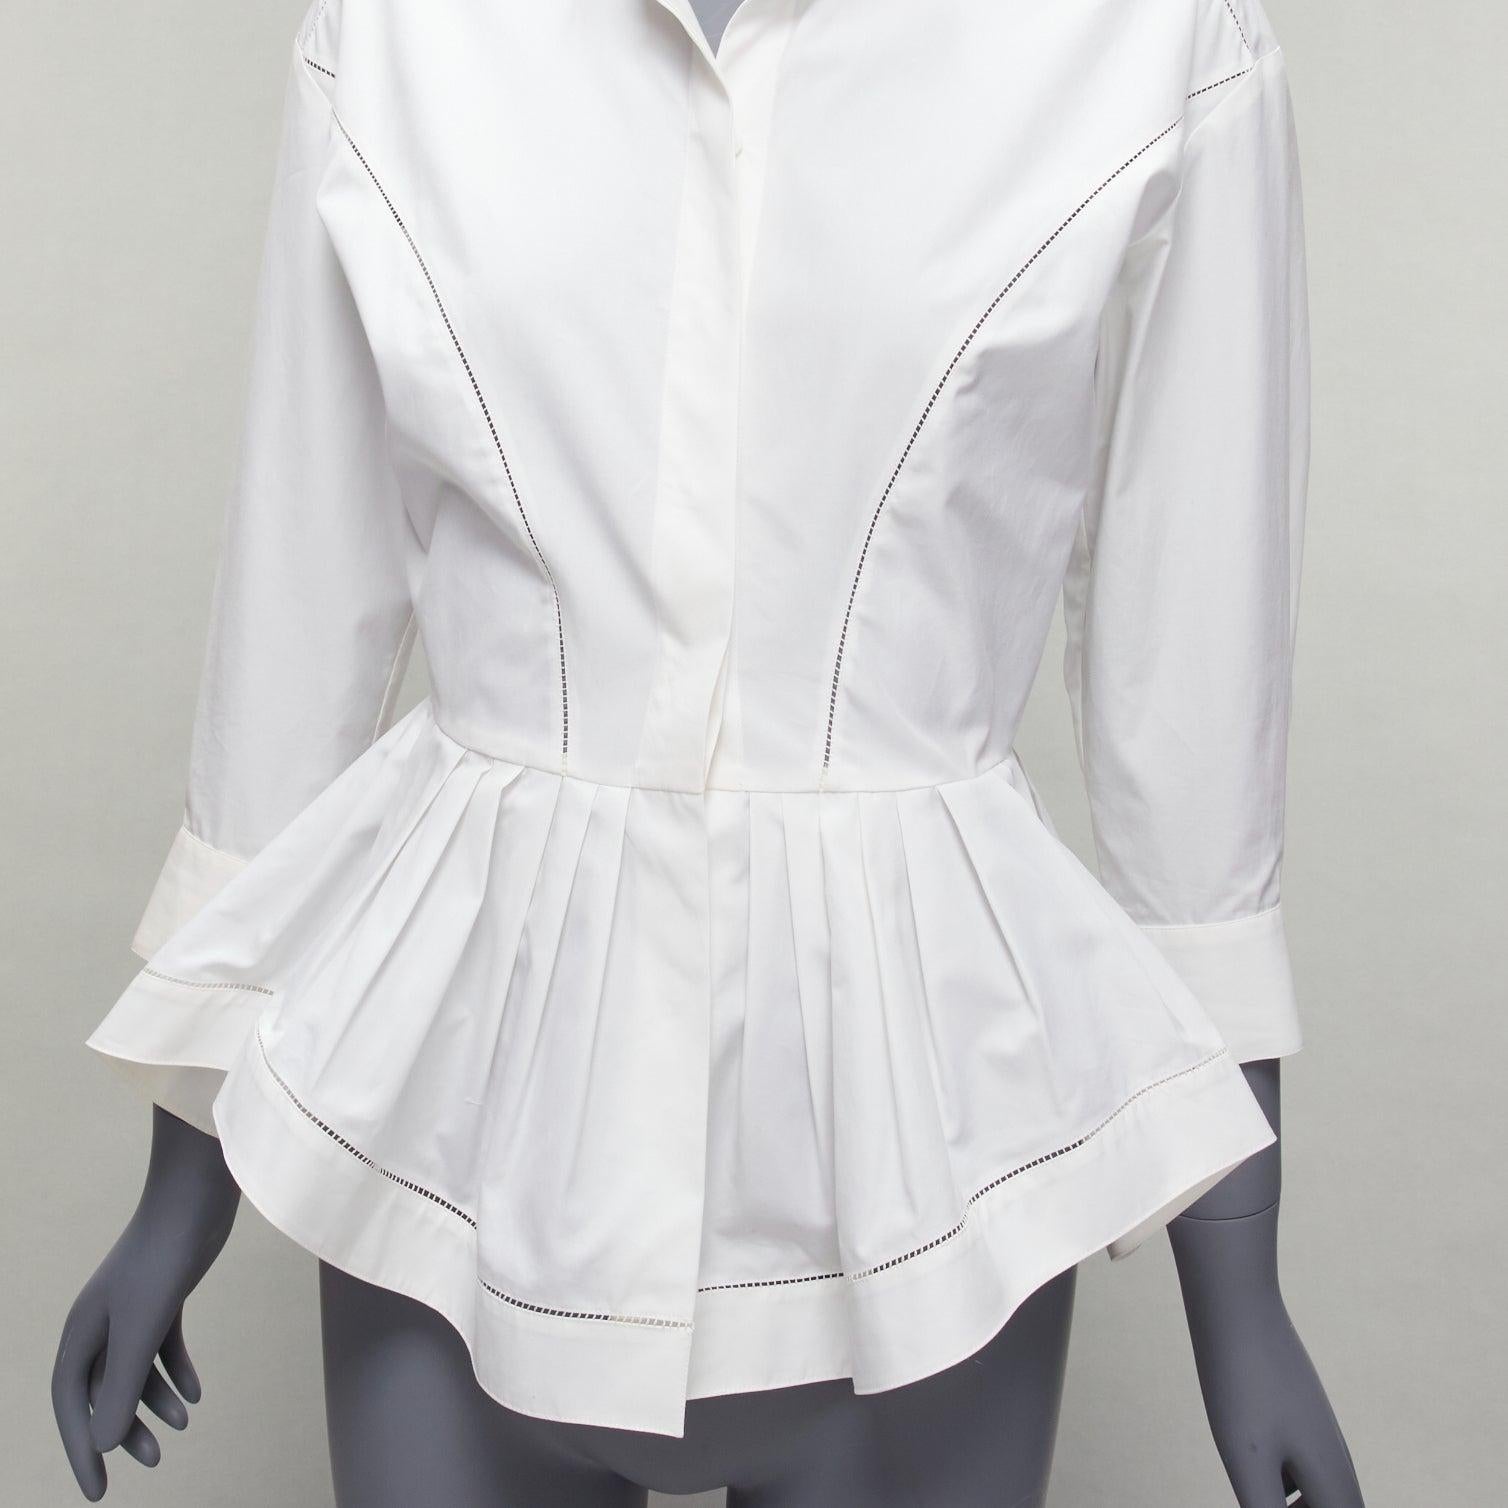 ALAIA cream cotton lattice seam ruffle peplum waist dress shirt FR36 S
Reference: SNKO/A00220
Brand: Alaia
Material: Cotton
Color: Cream
Pattern: Solid
Closure: Button
Extra Details: Concealed buttons. Peplum back.
Made in: